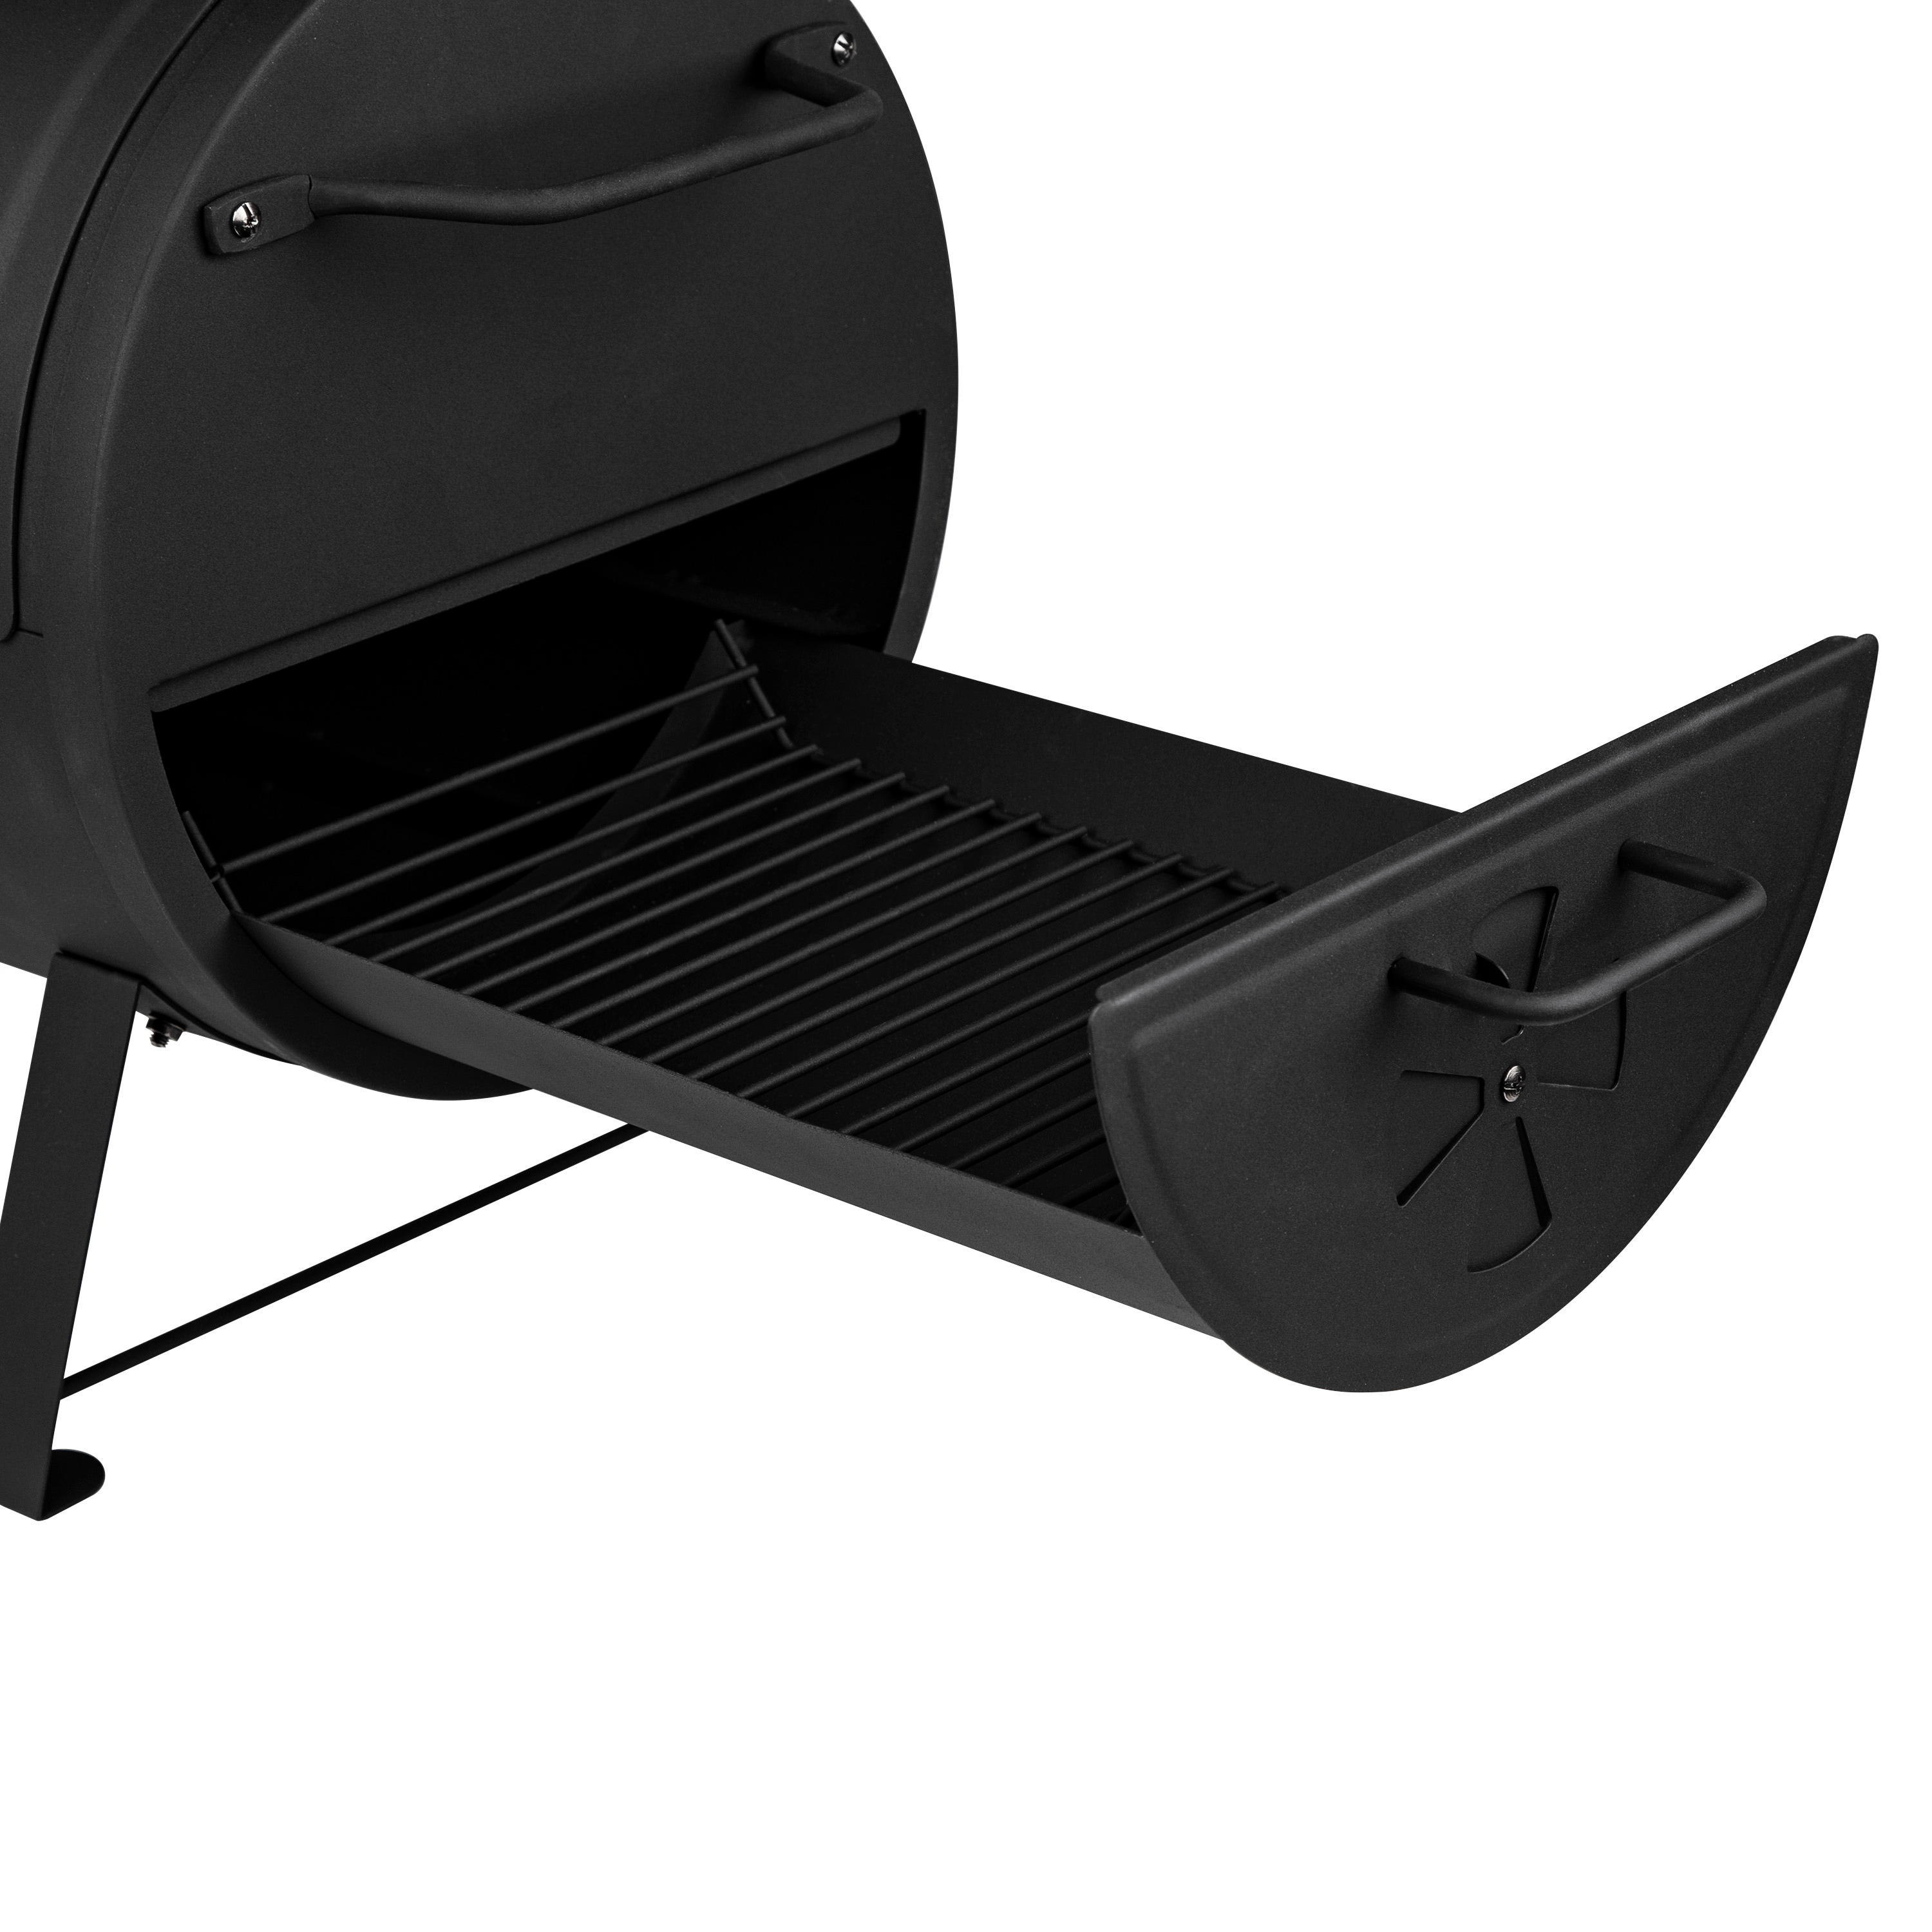 Sidekick Portable Charcoal Grill, 250-Sq. In. Cooking Surface